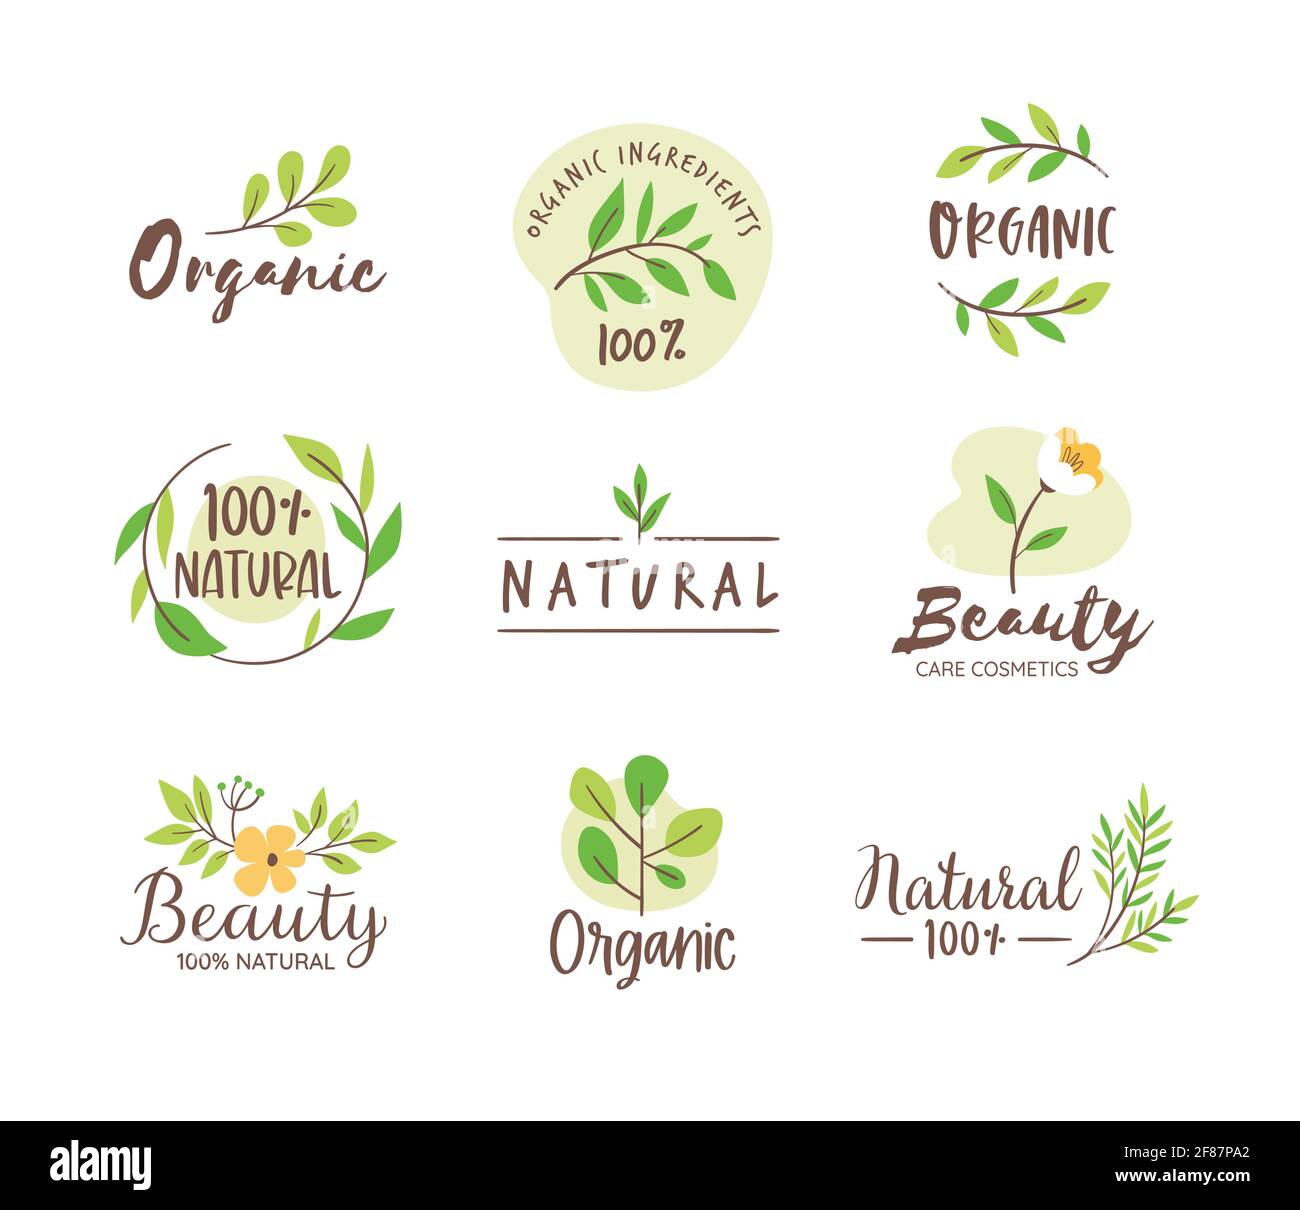 Organic and Natural logo collection. Hand drawn natural cosmetic emblems. Skin Care; organic beauty products. Vector illustration. Stock Vector